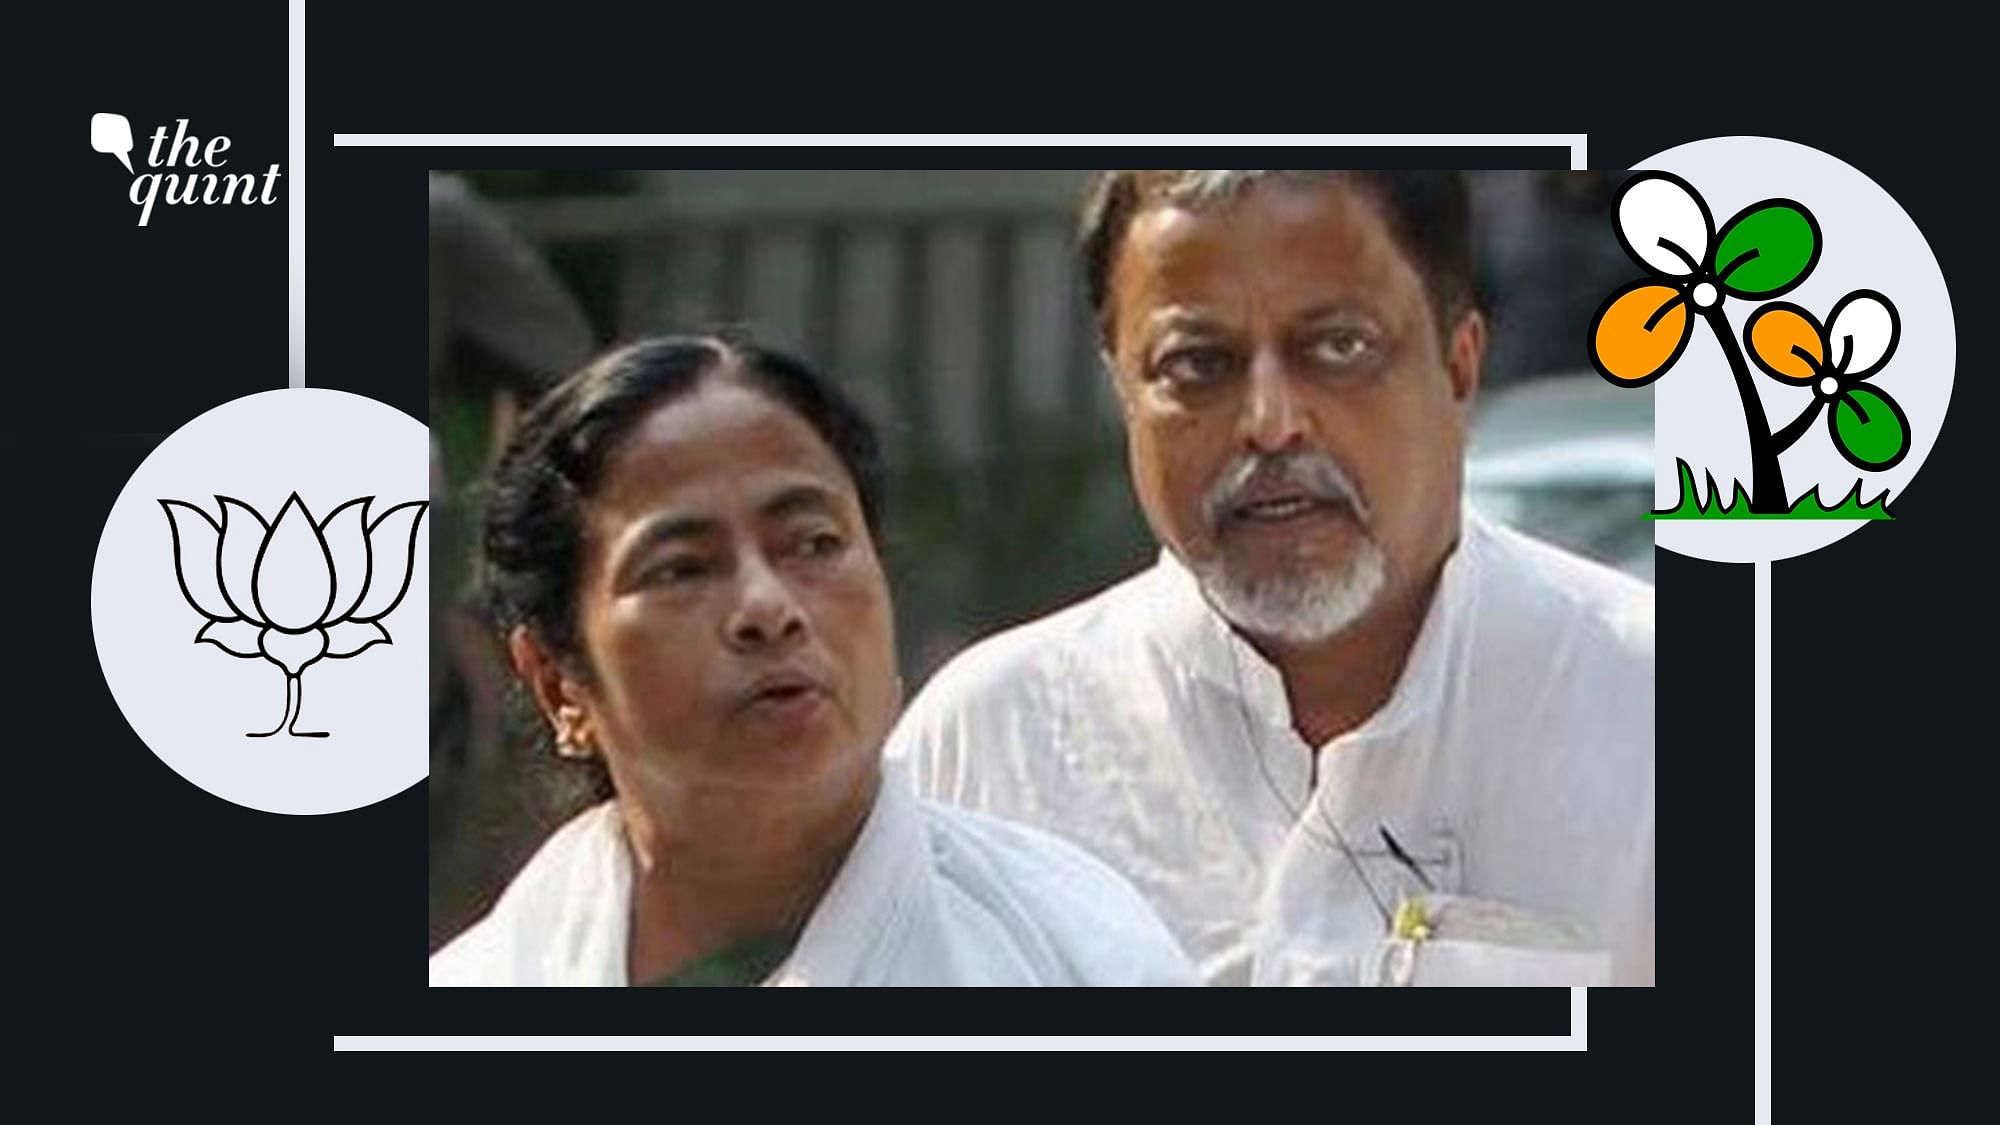 BJP leader from West Bengal, Mukul Roy, is looking to get back to his former party, the Trinamool Congress, a top source in the party has confirmed to The Quint.